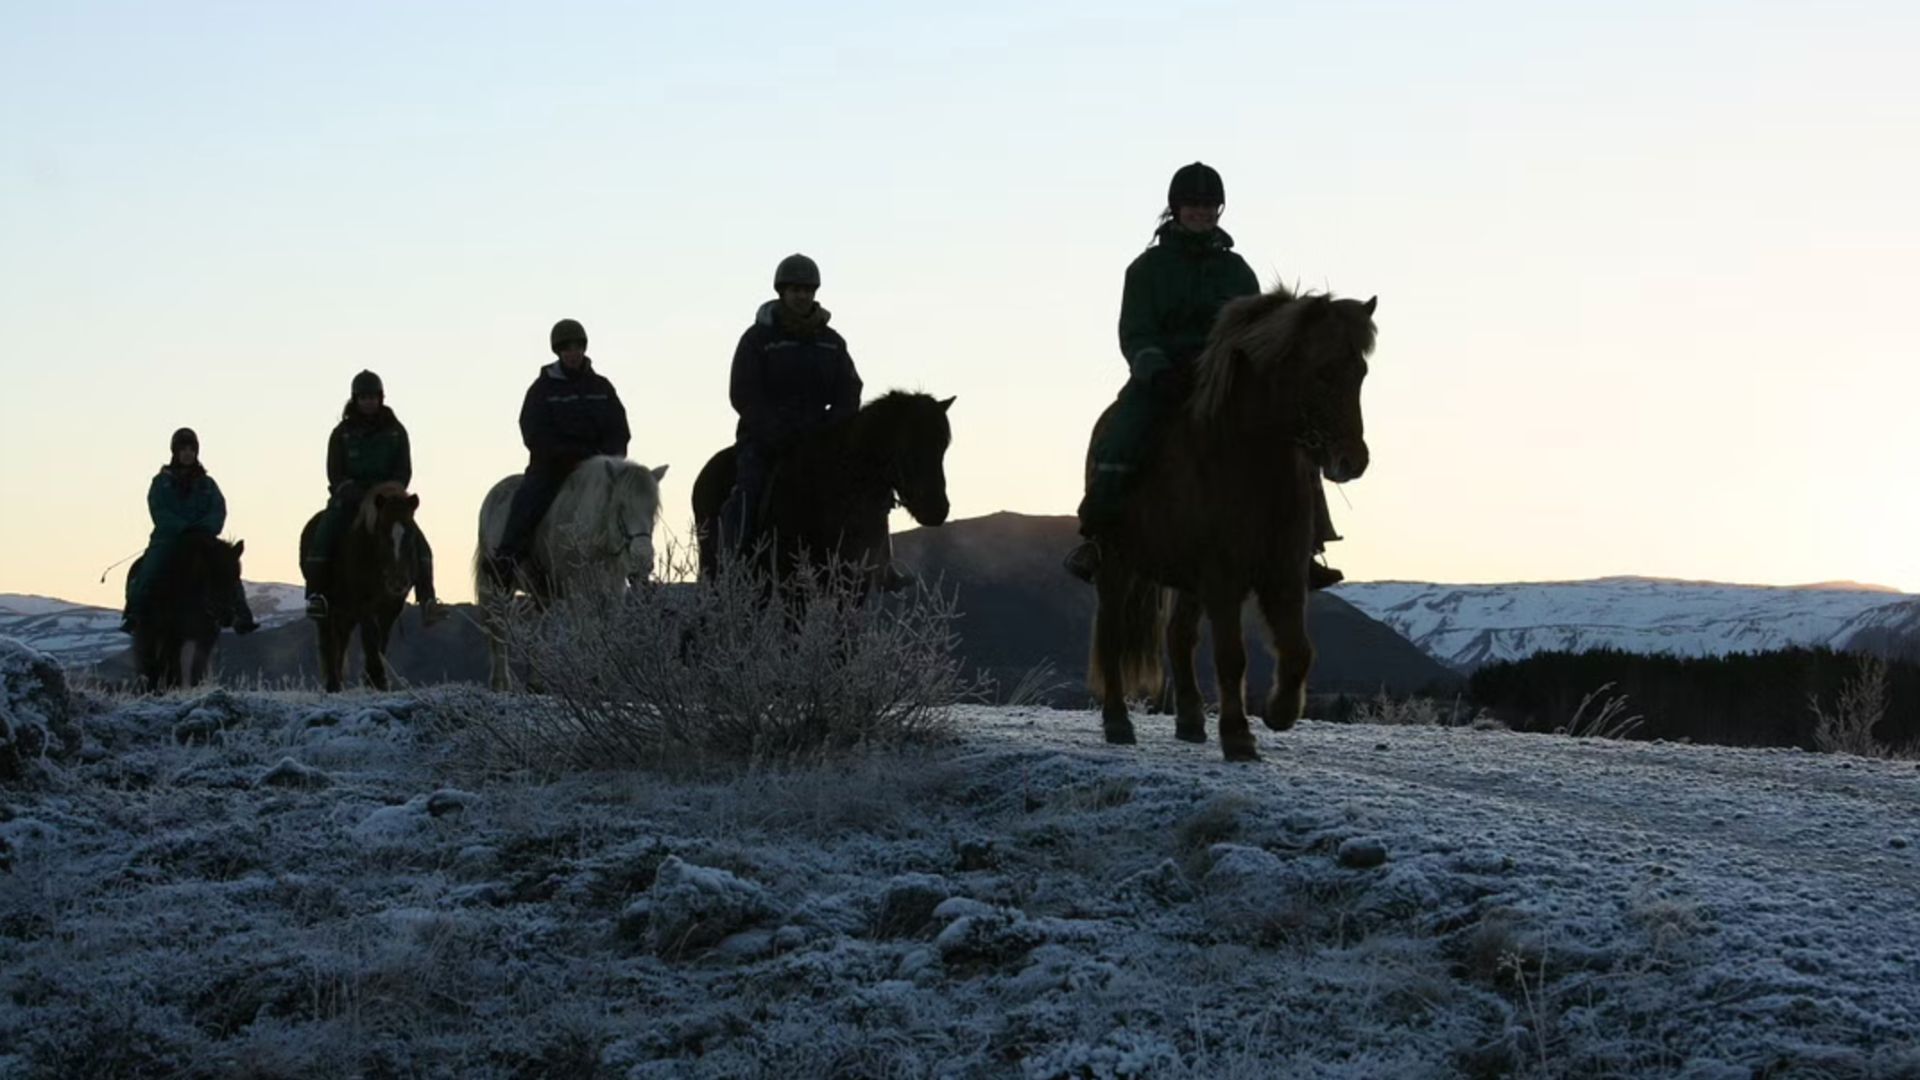 Tourists riding on horses in Iceland during sunset